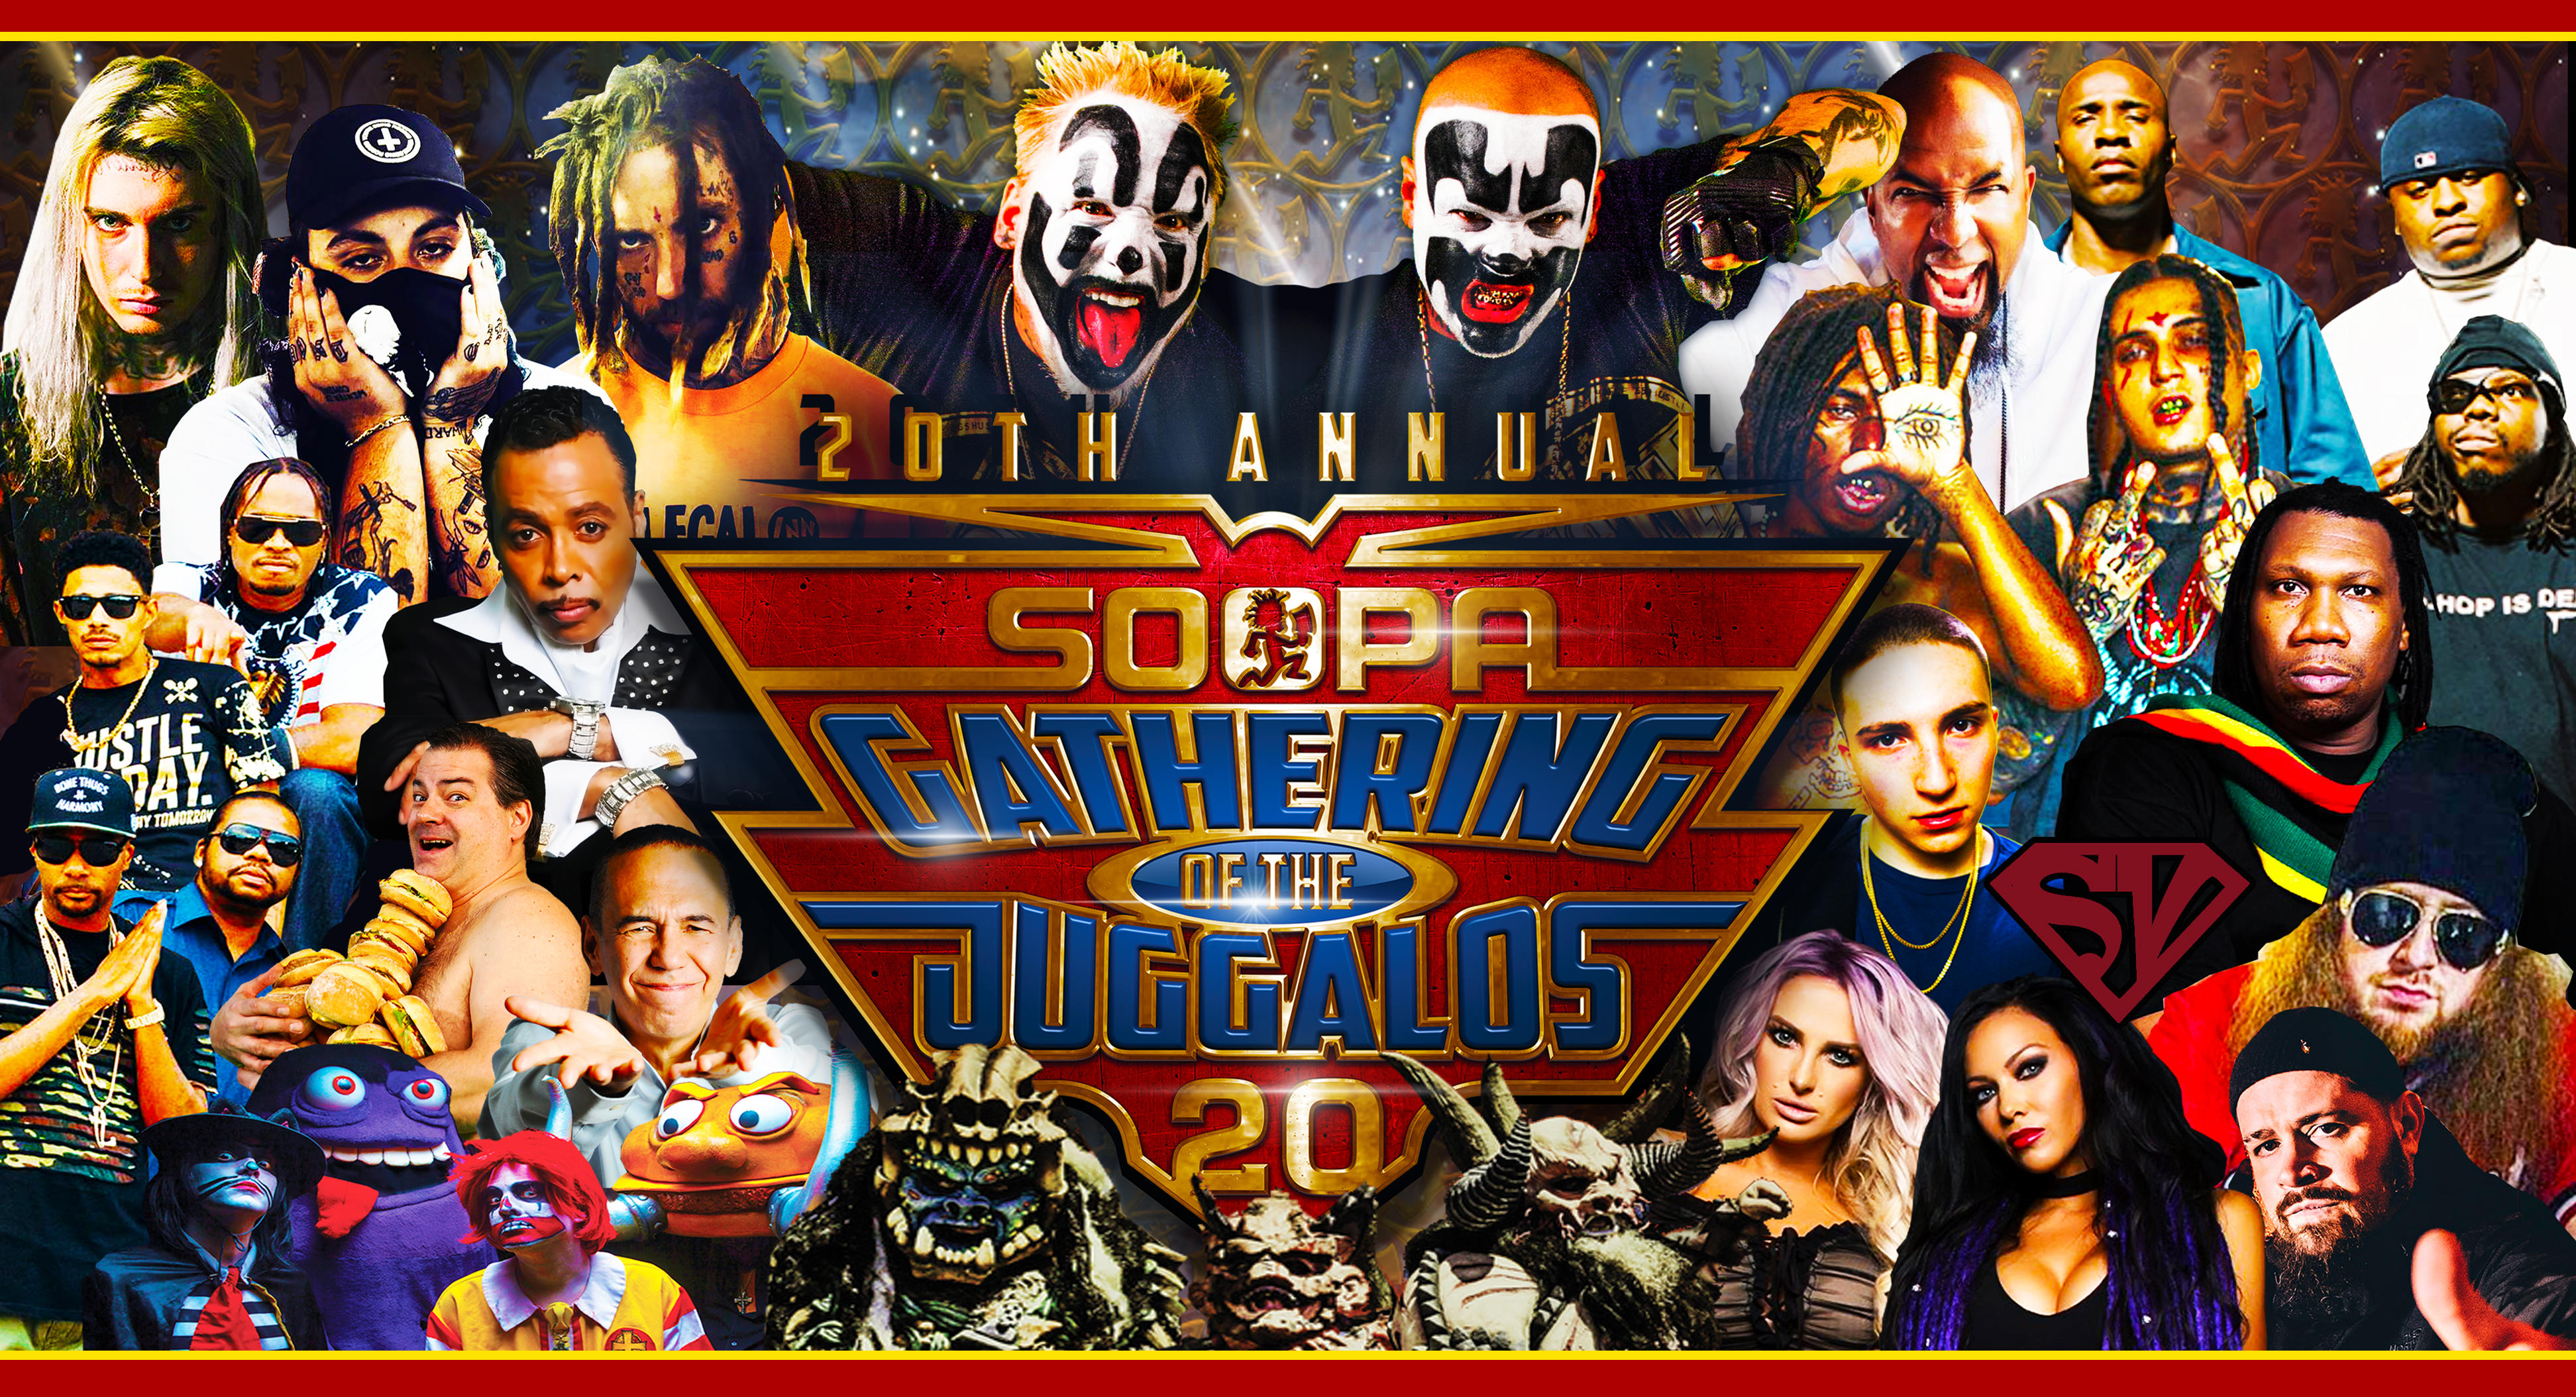 Gathering of the Juggalos 20